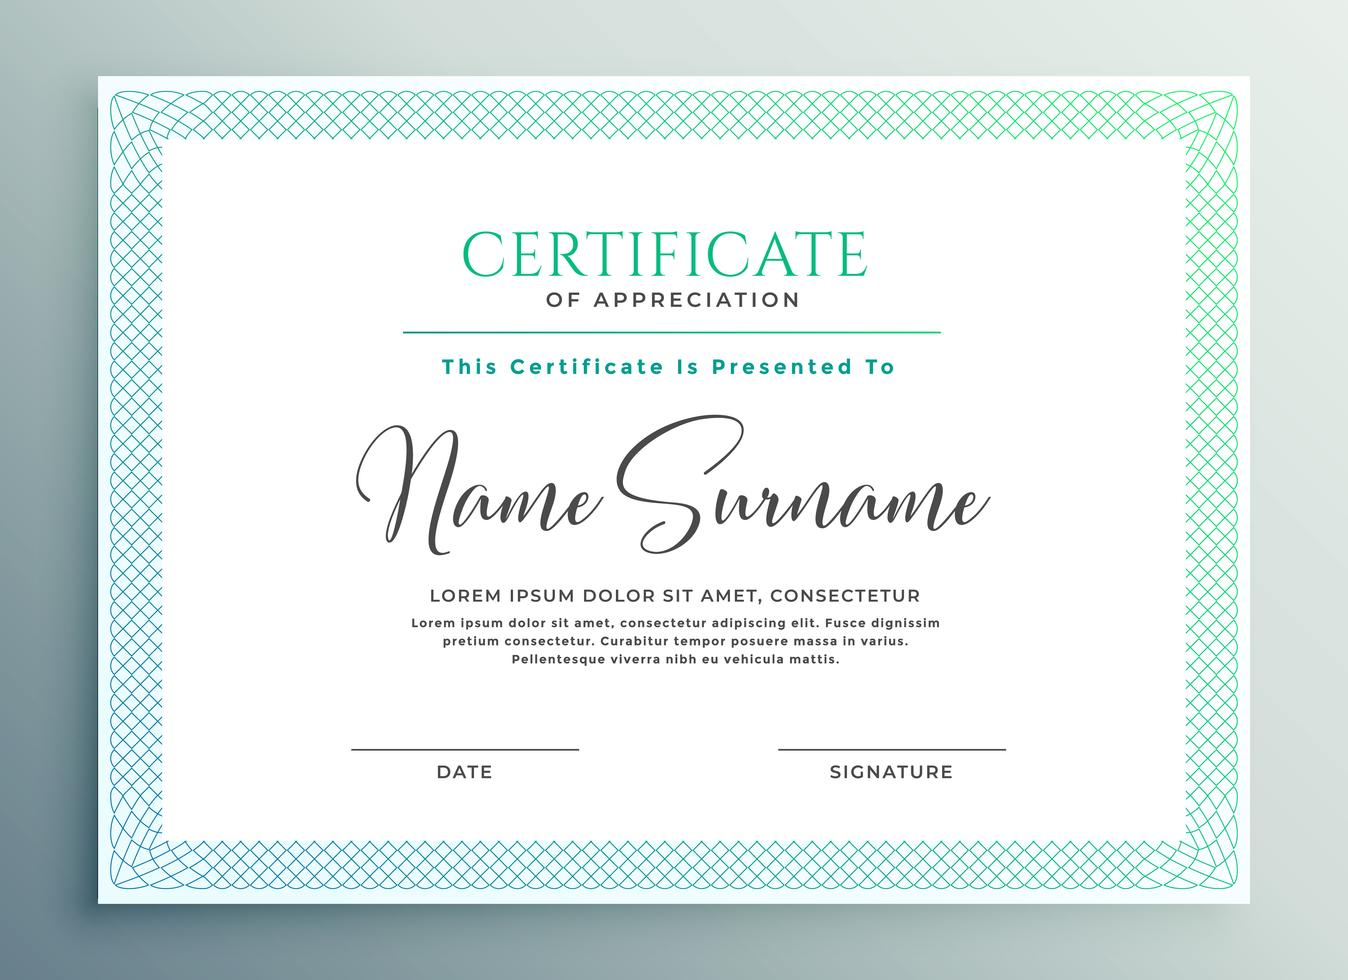 10 Employee Of The Month Certificate Sample | Payment Format Within Employee Of The Month Certificate Template